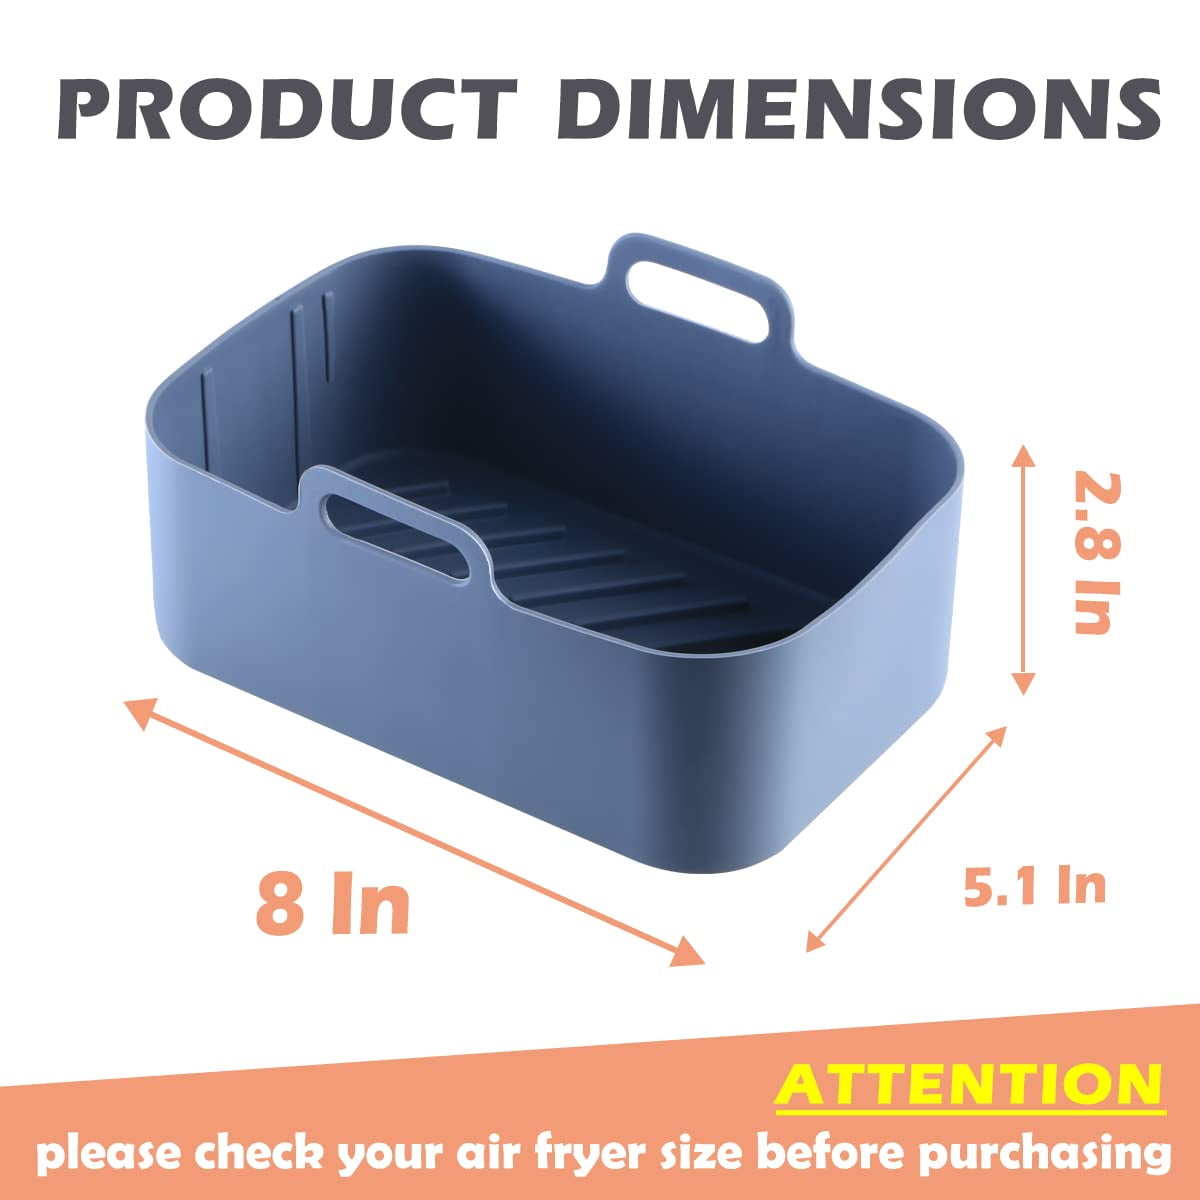 10QT Air Fryer Silicone Liners, MMH 2Pcs Rectangular Airfryer Silicone Pot  Baking Tray Reusable Replacement Basket Insert for Ninja DZ401, DZ550,  Non-stick, Food Safe, Gray 